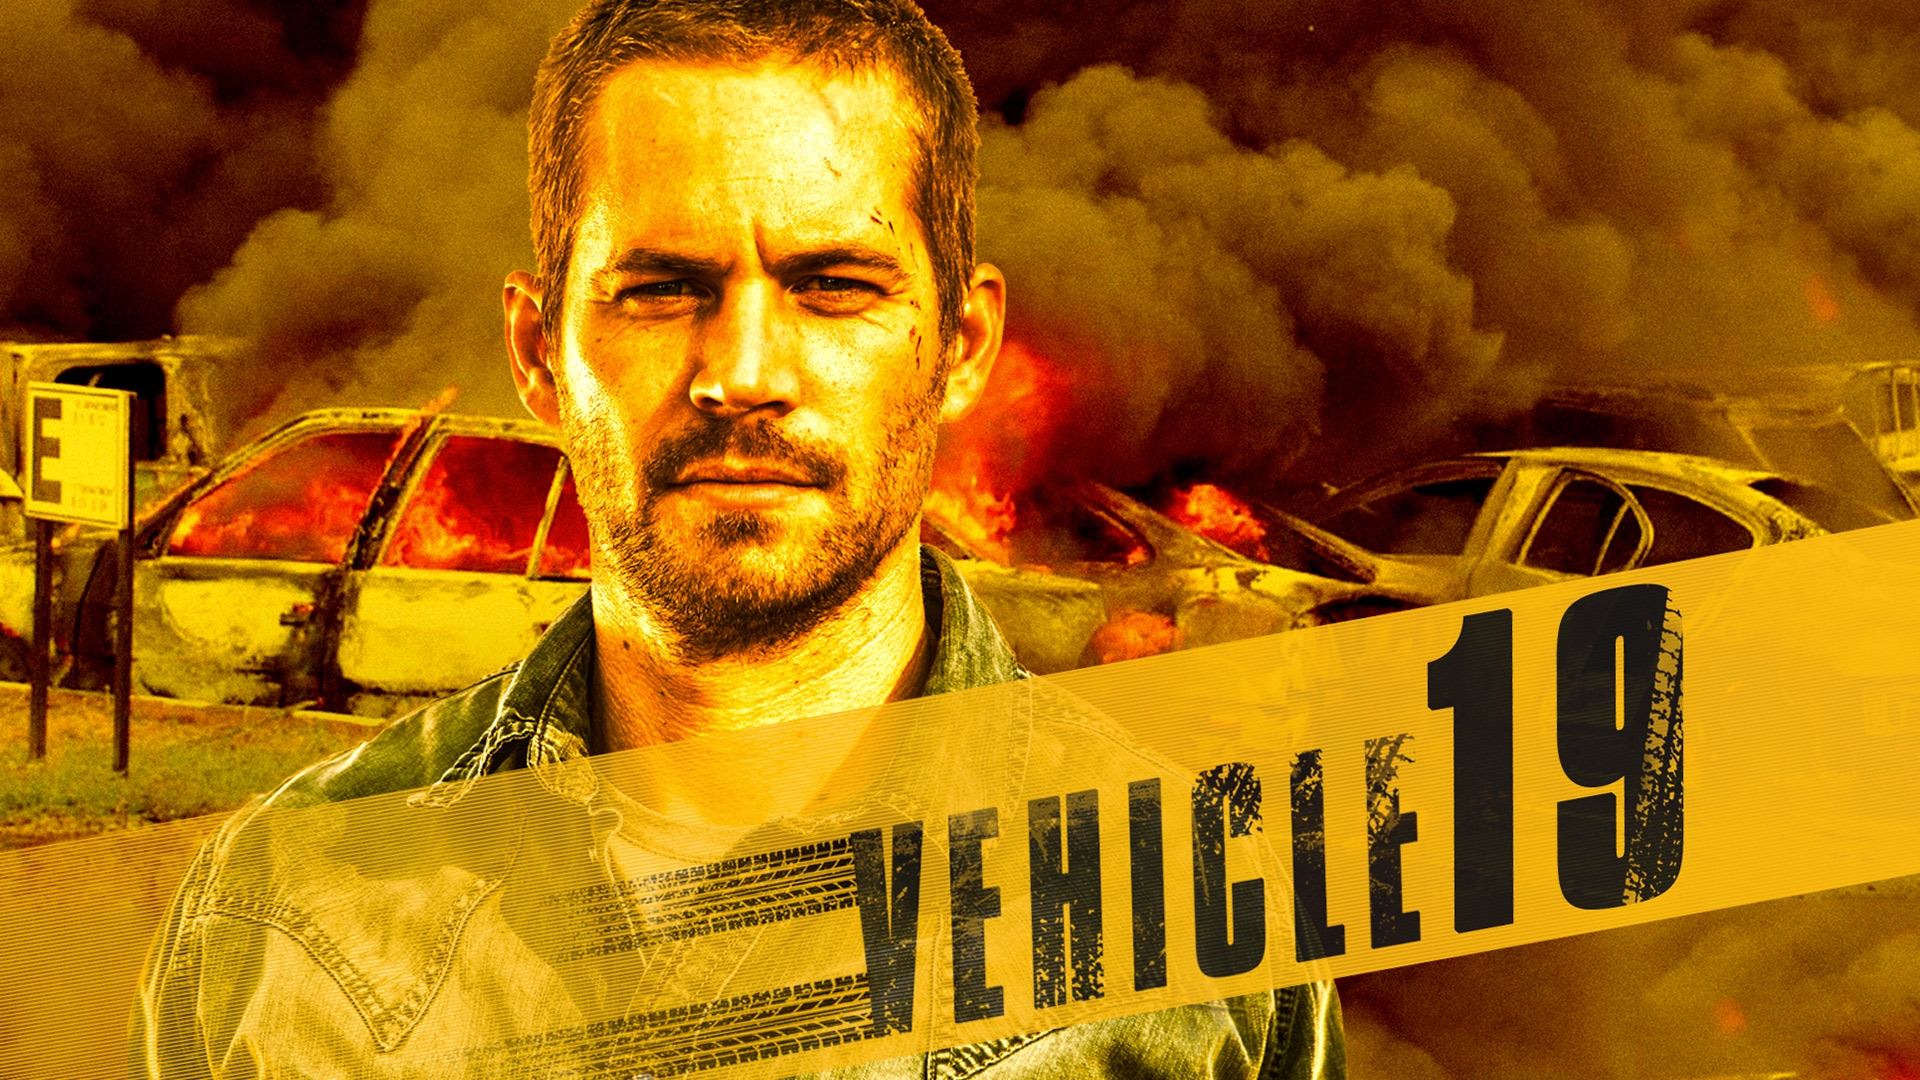 Everything You Need to Know About Vehicle 19 Movie (2013)